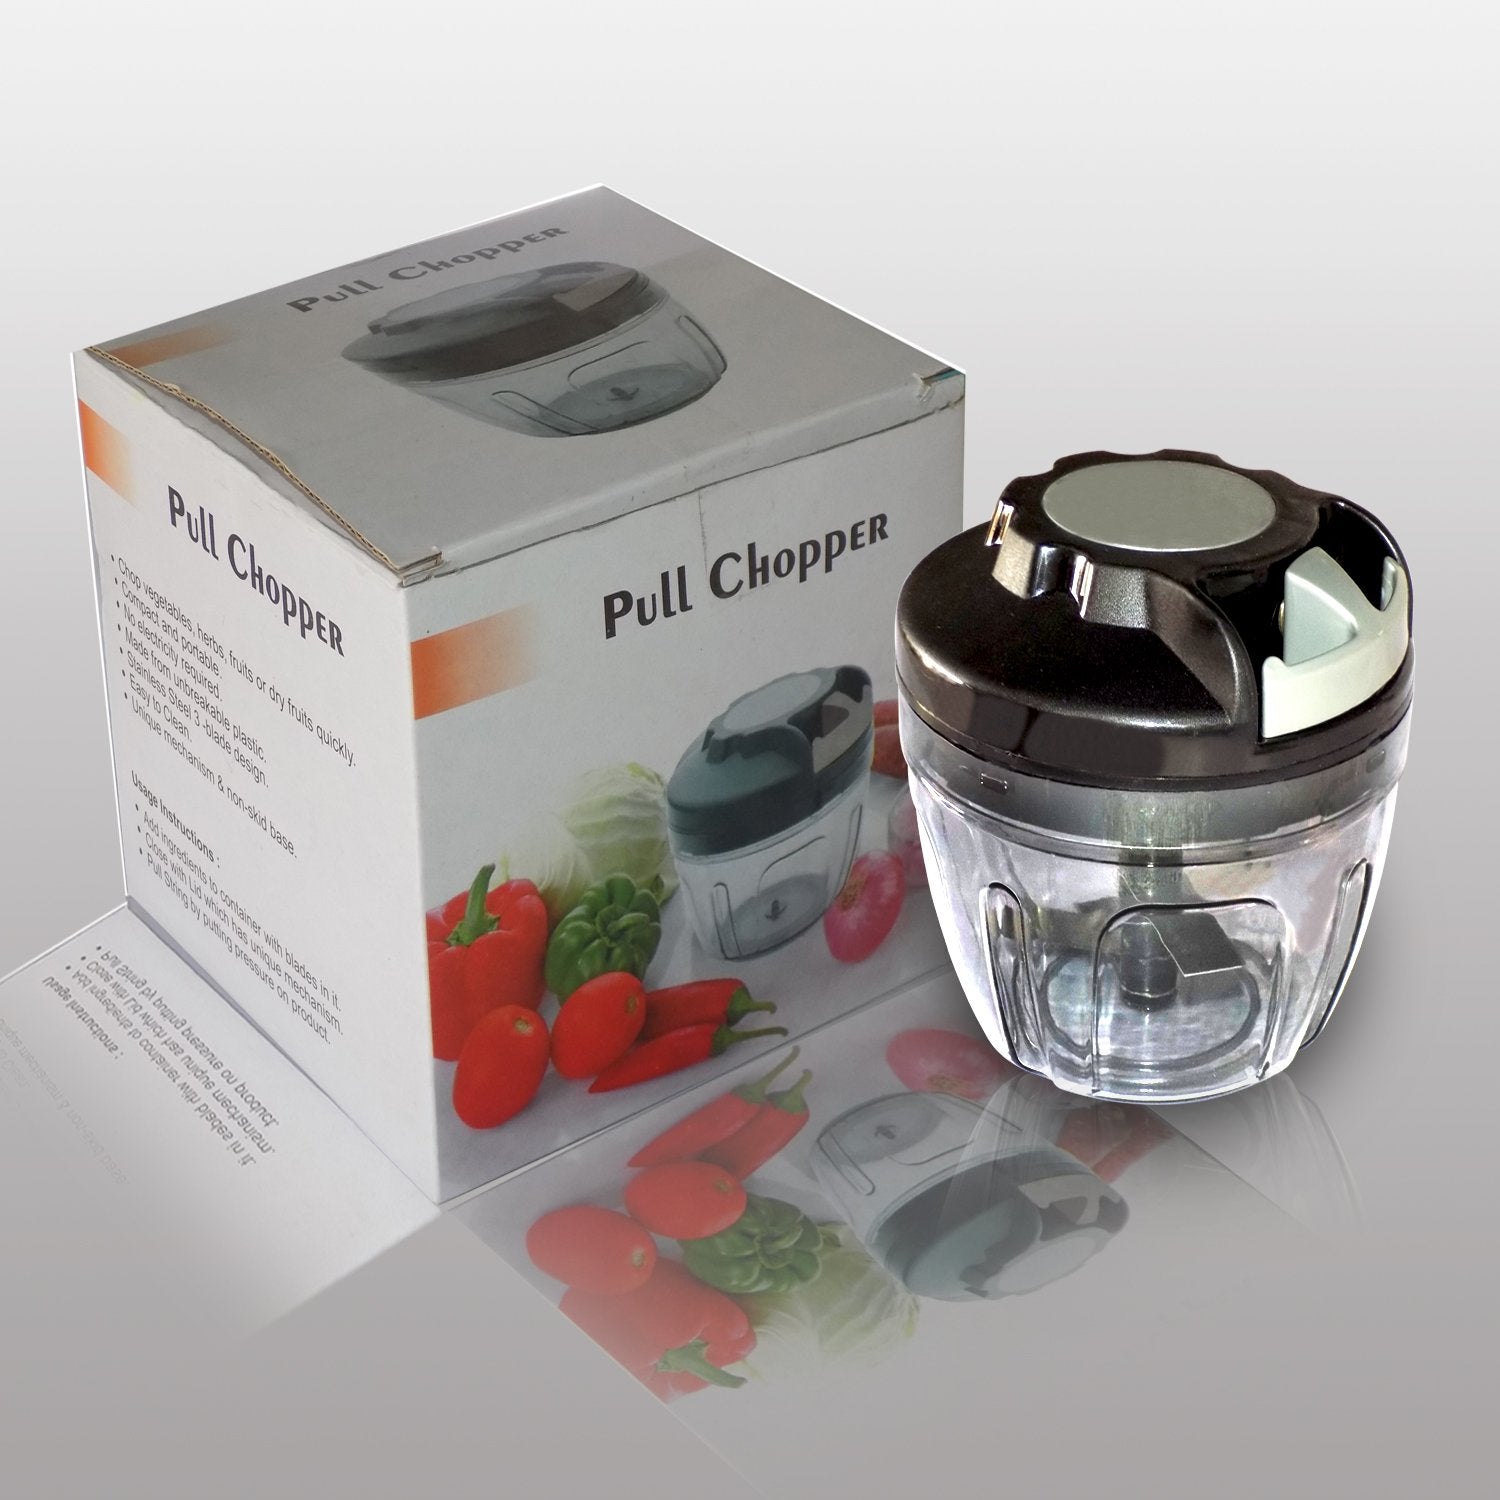 ambitionofcreativity in manual food chopper for vegetable fruits nuts onions chopper blender mixer food processor